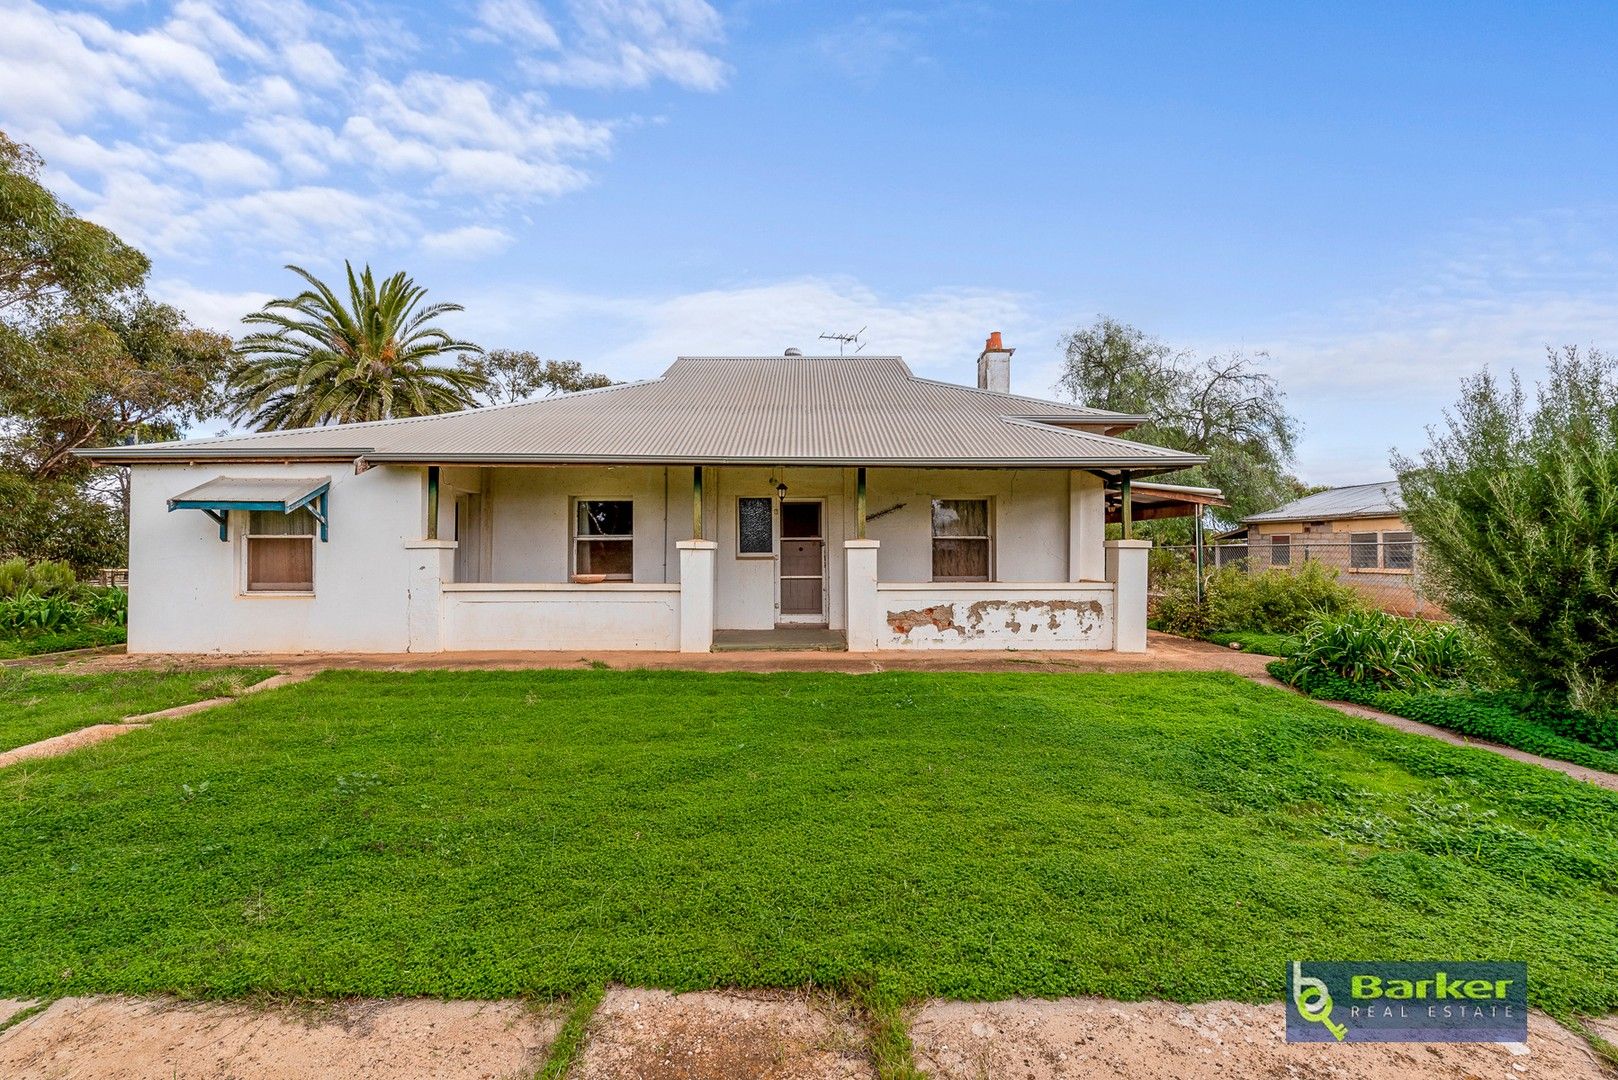 170 Boundary Road, Fischer SA 5502, Image 0